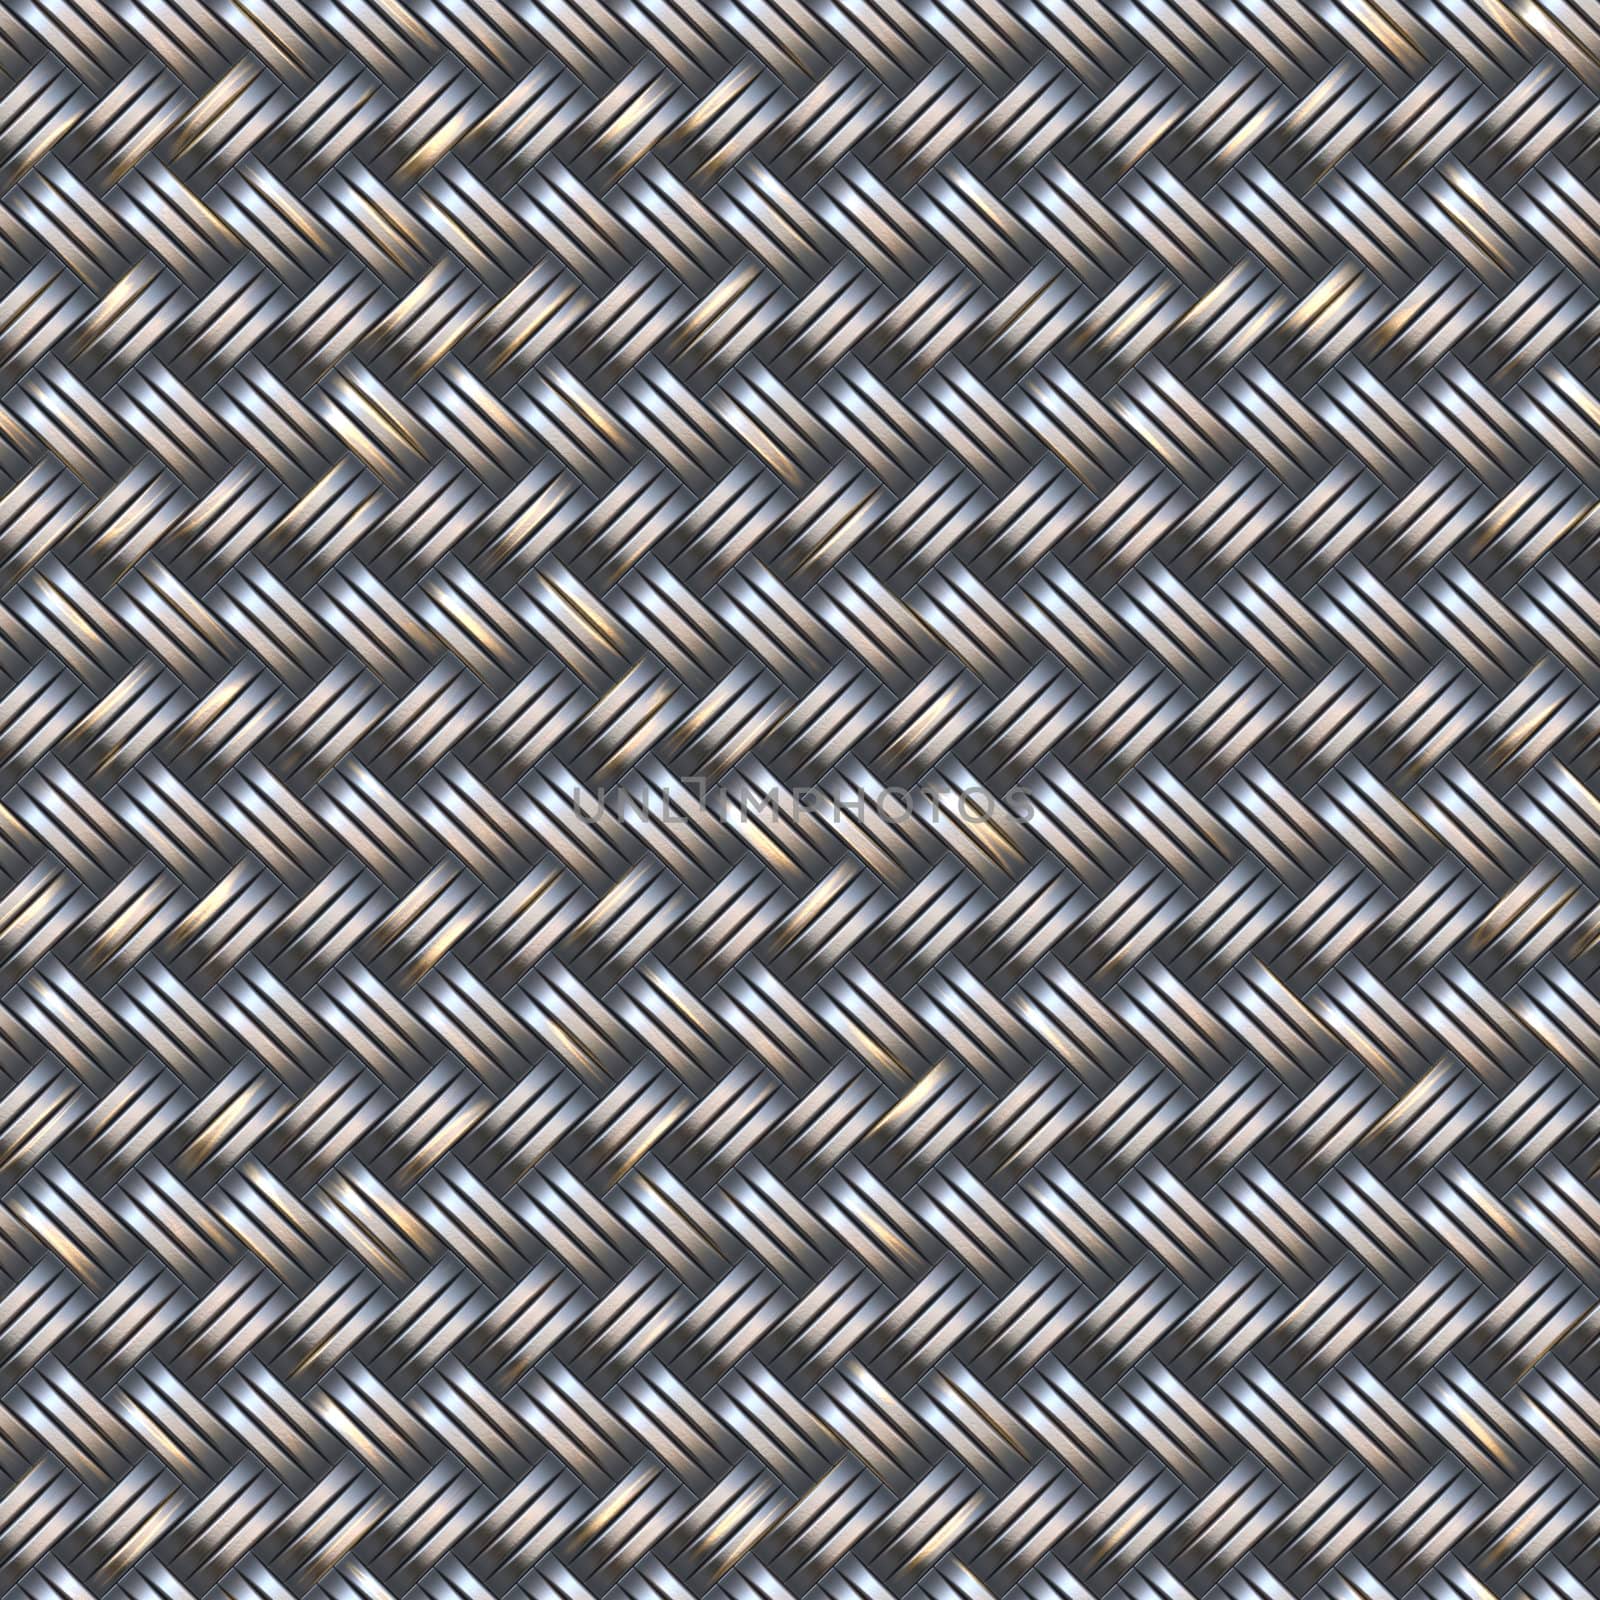 great background image of strong woven metal